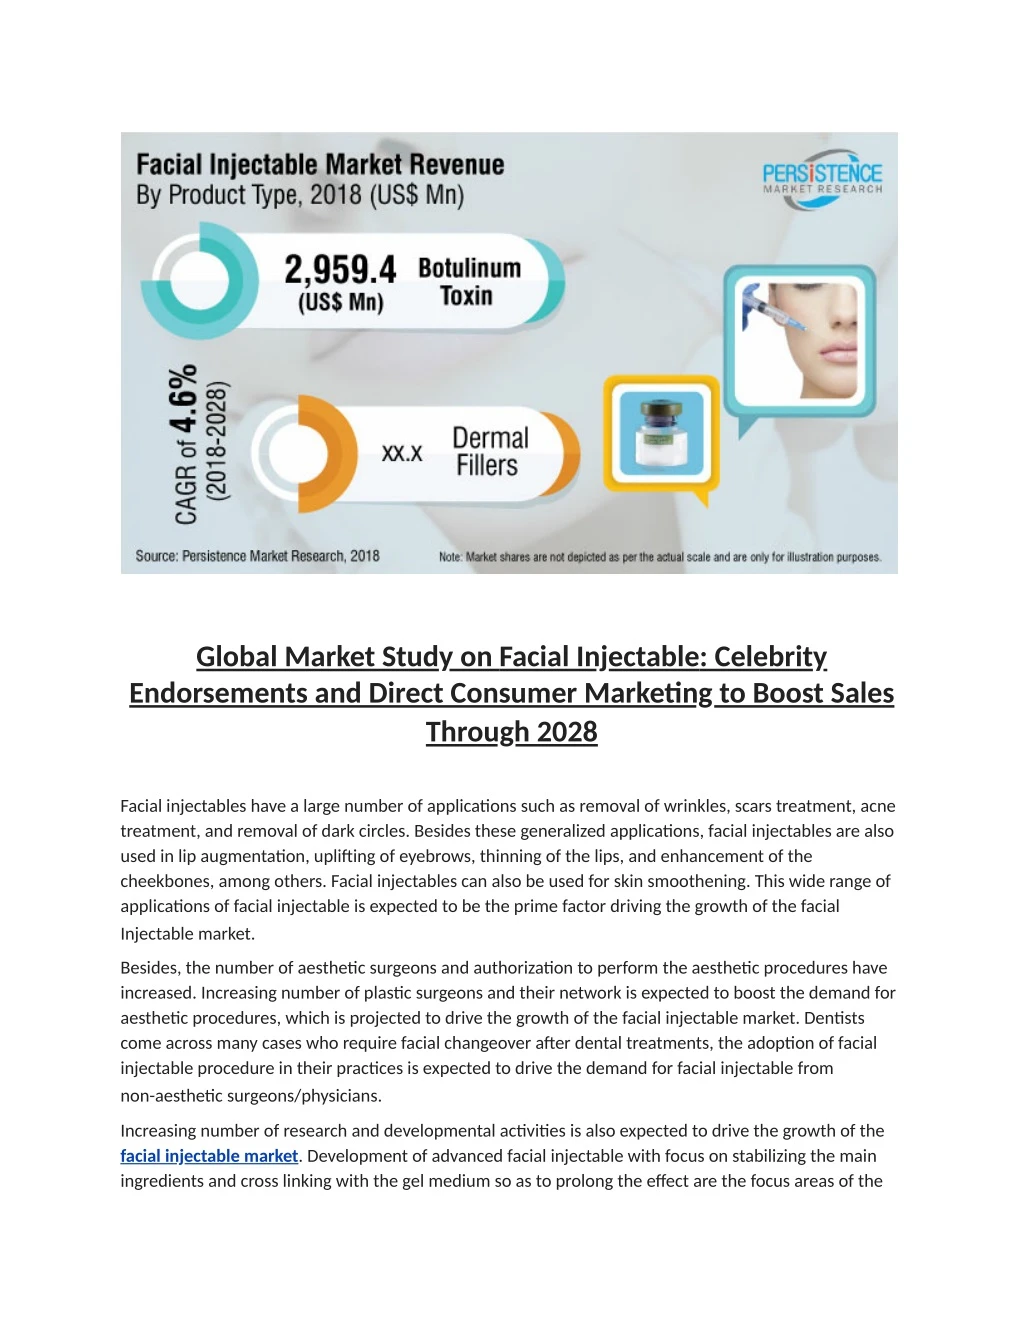 global market study on facial injectable